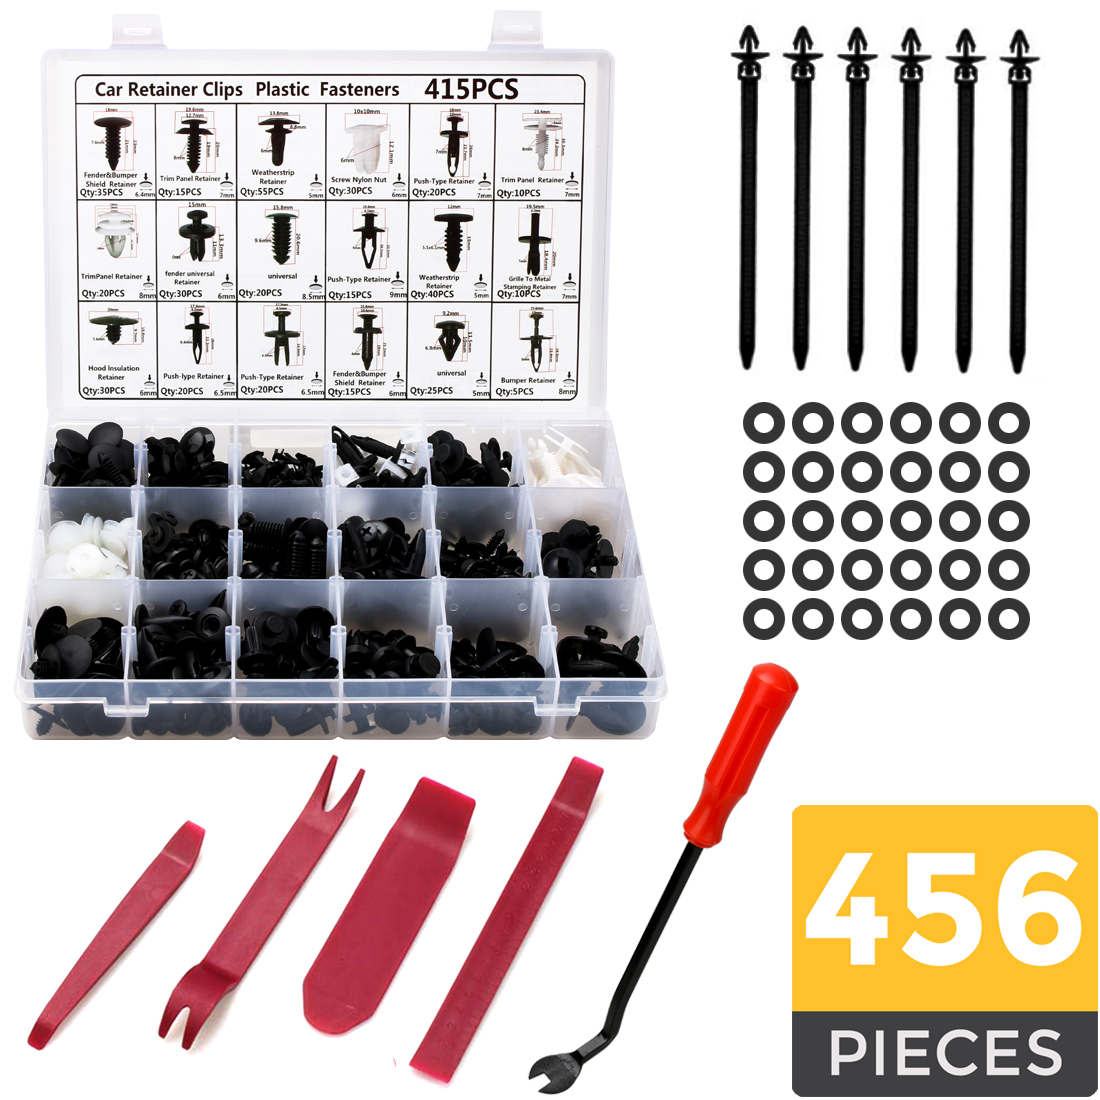 MUYI 240Pcs Automotive Upholstery Retainer Door Trim Panel Fastener Clips Push Pins Rivet Expansion Screws Kits for Honda Chrysler Toyota Ford GM with Fastener Remover 